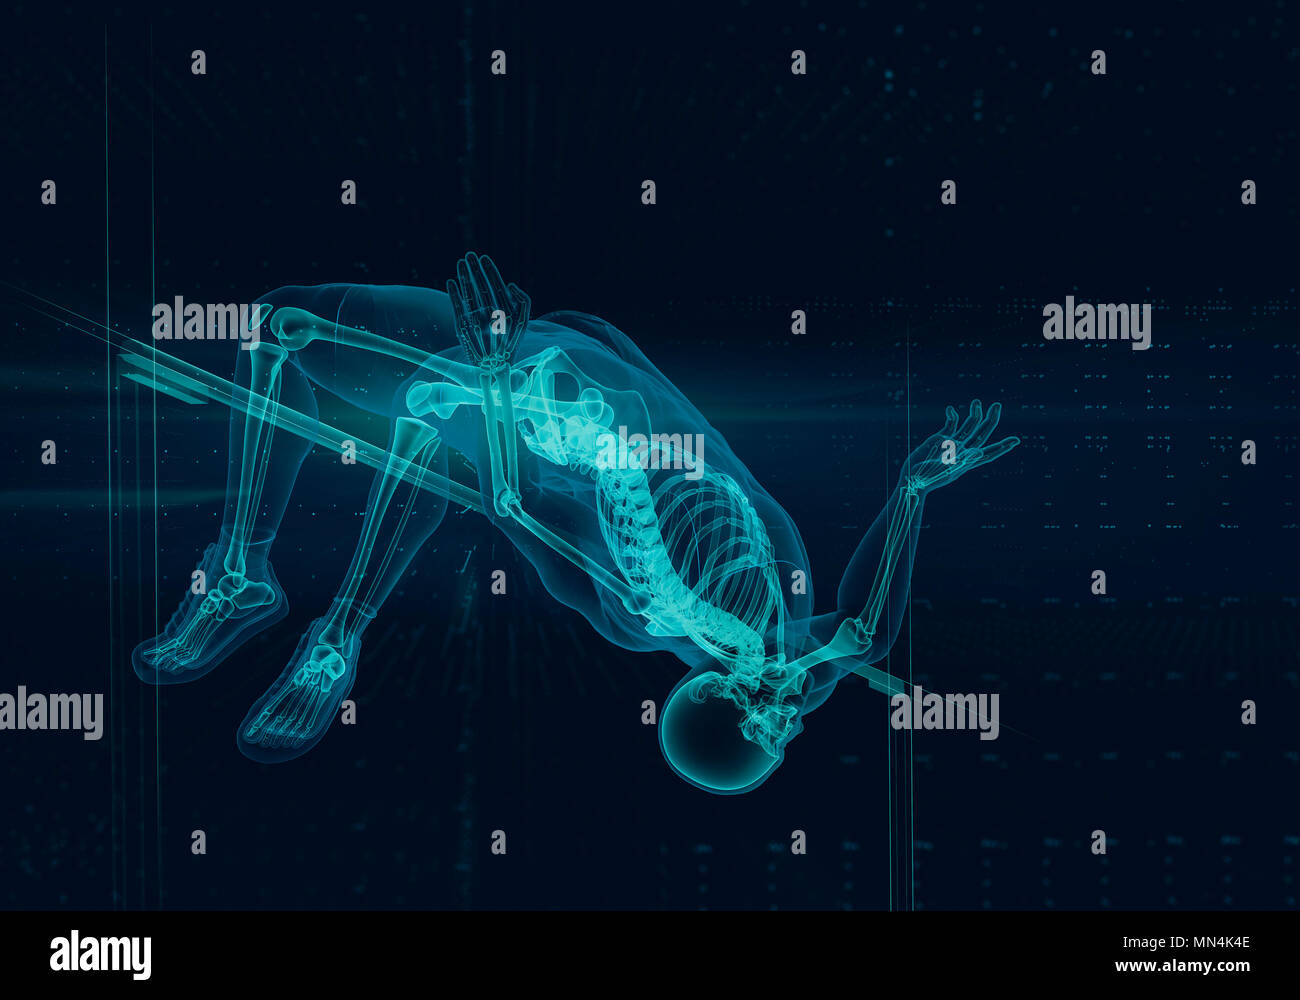 Computer generated image x-ray skeleton track and field athlete high jumping Stock Photo